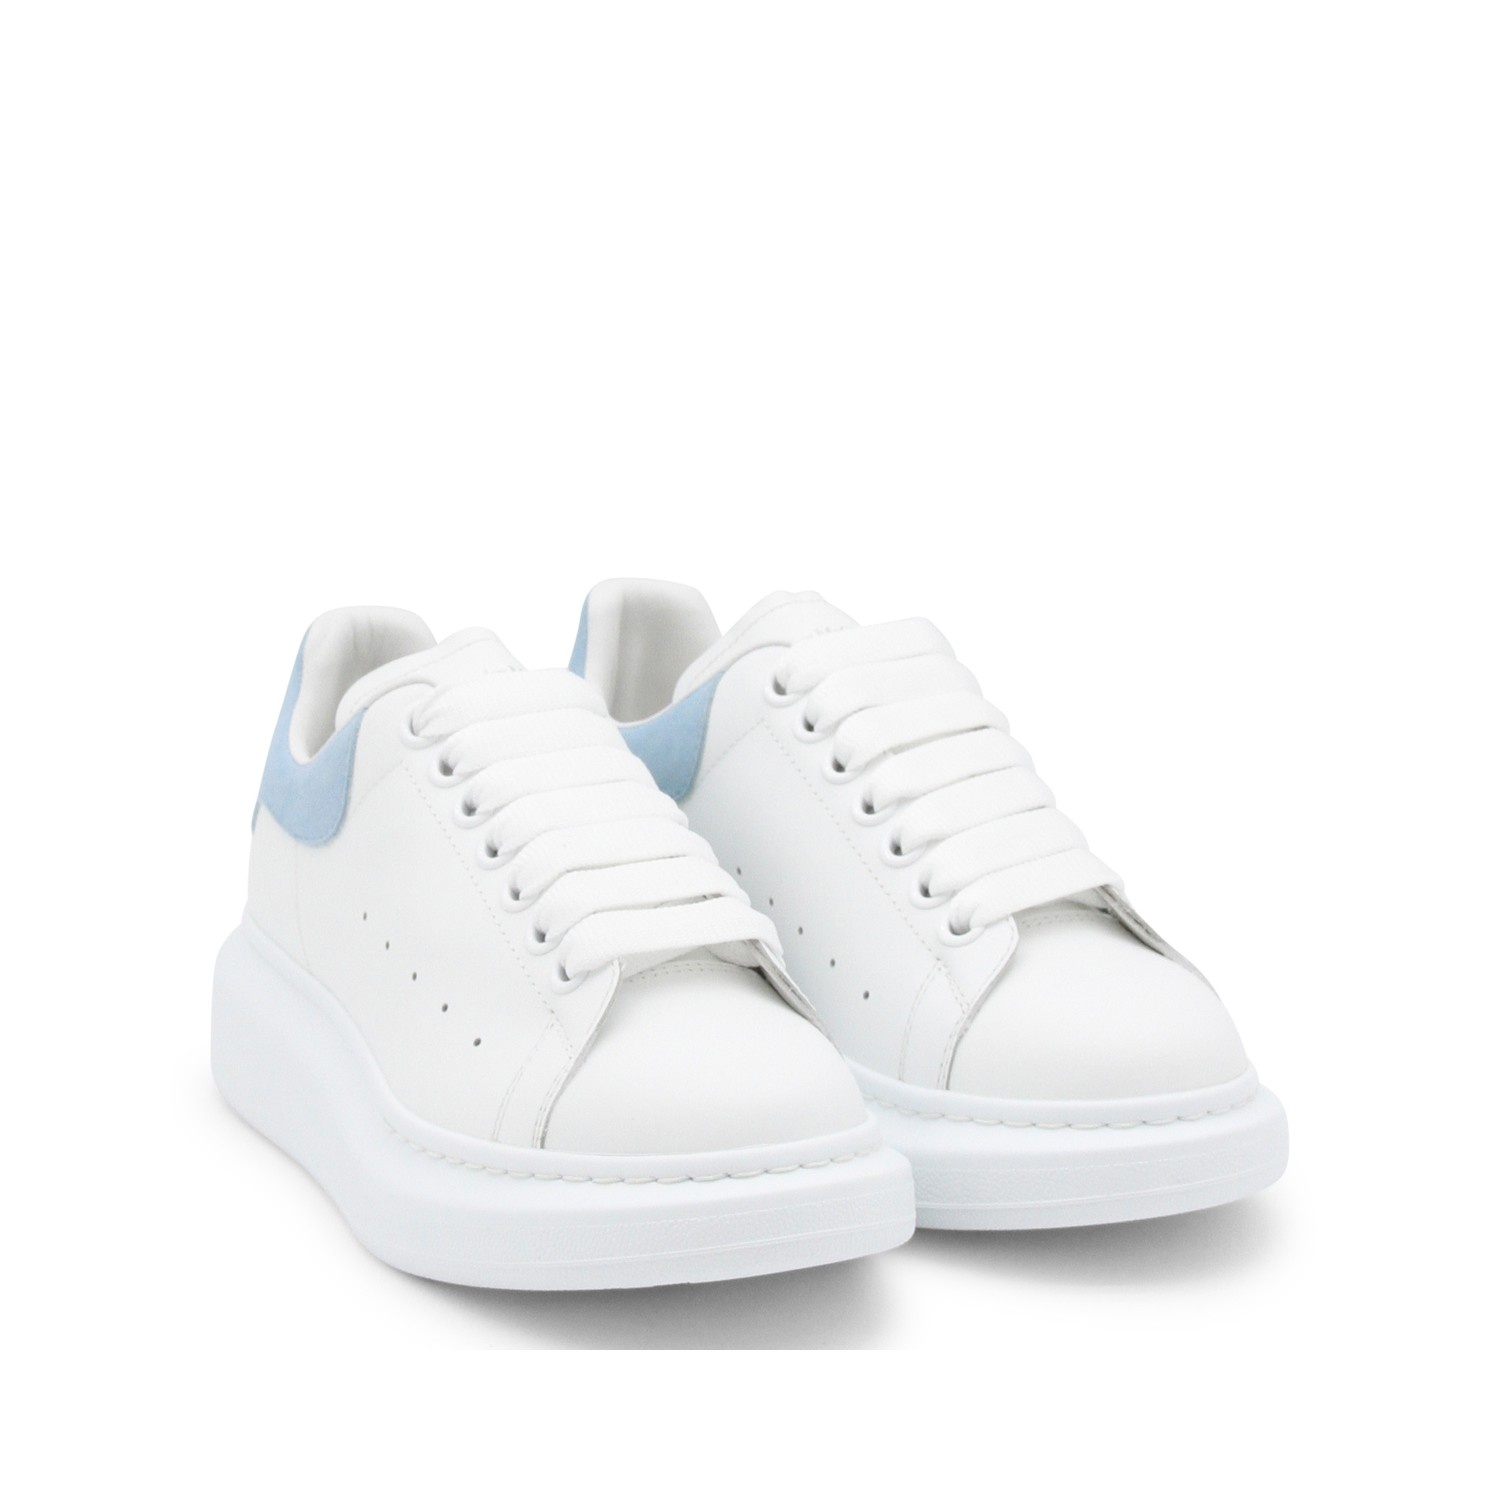 WHITE AND POWDER BLUE LEATHER OVERSIZED SNEAKERS - 2